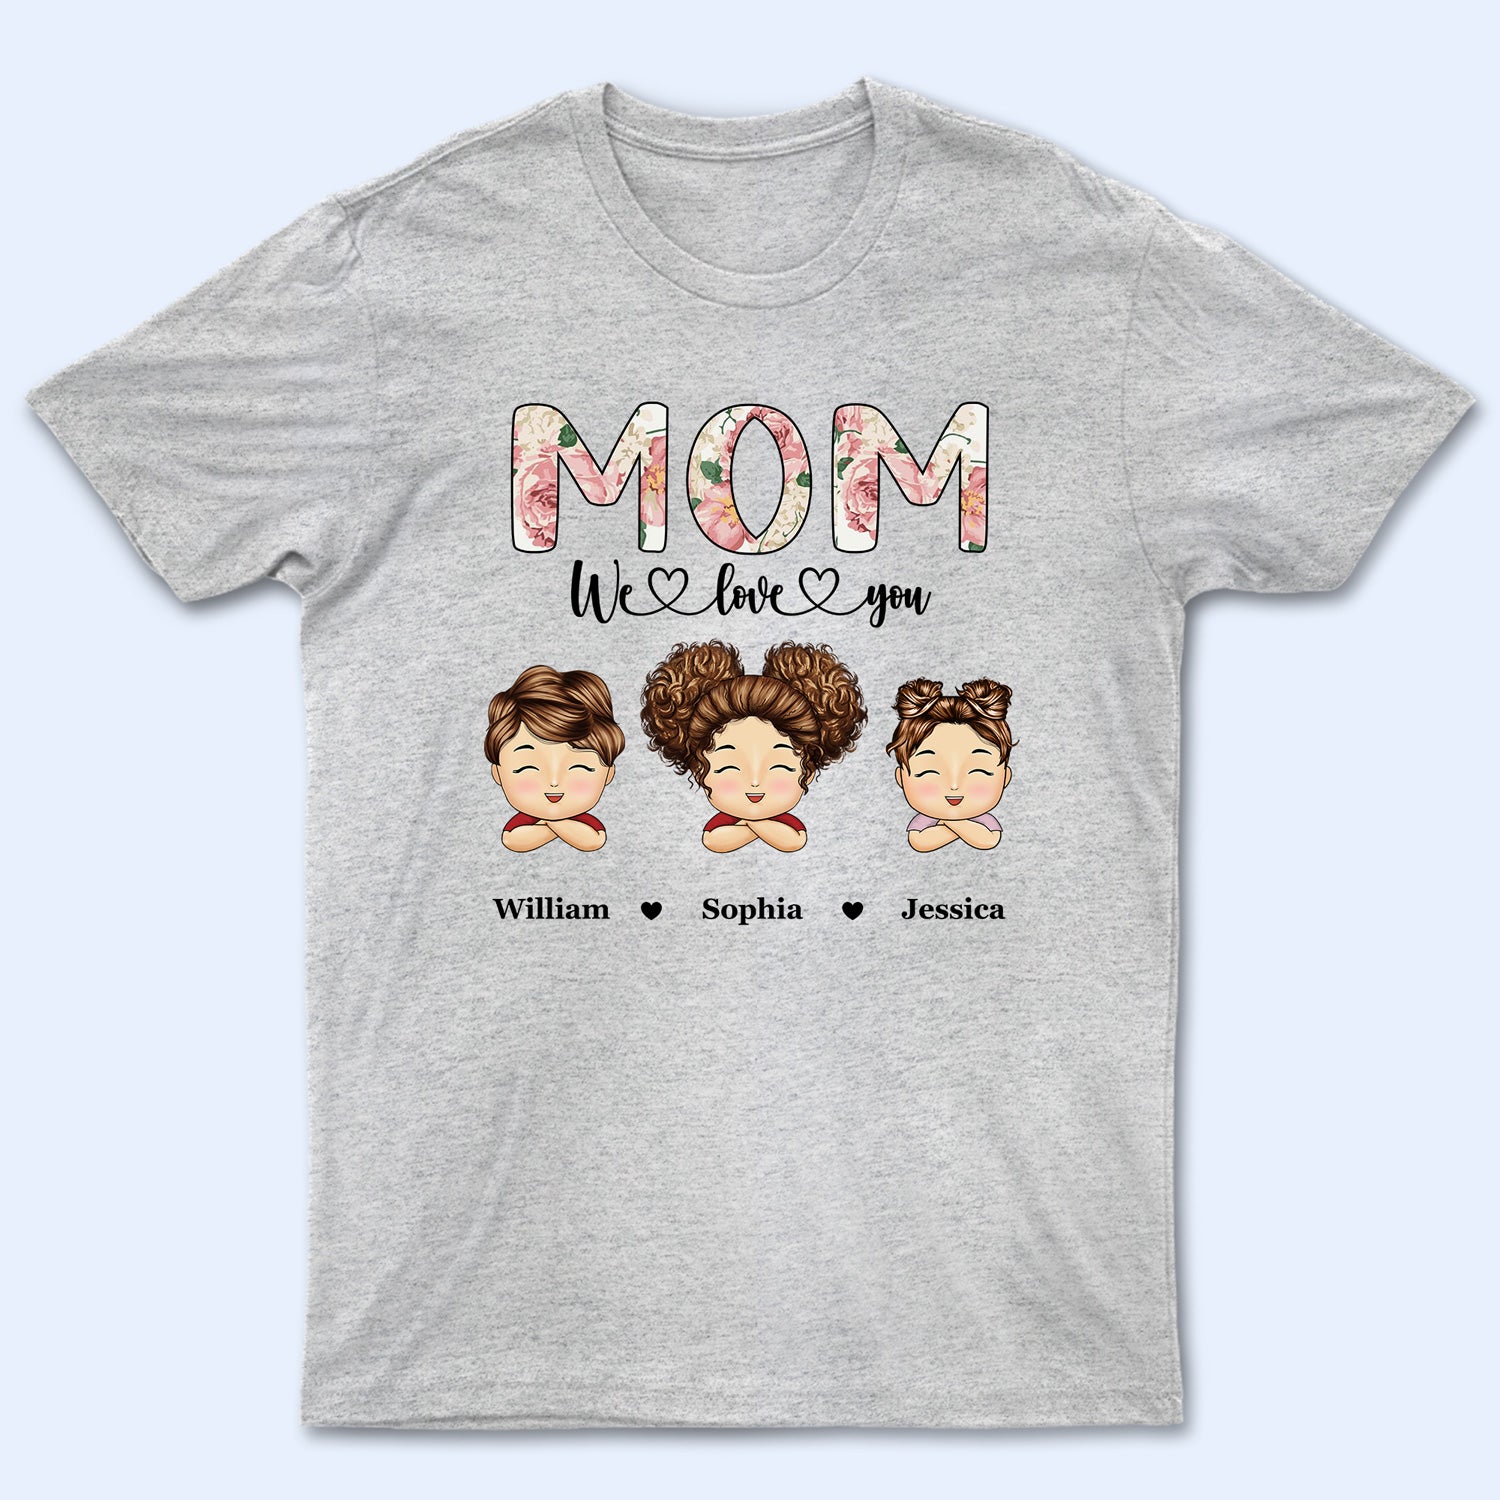 Nana, Mom, Auntie We Love You Floral - Birthday, Loving Gift For Mother, Grandma, Grandmother - Personalized T Shirt